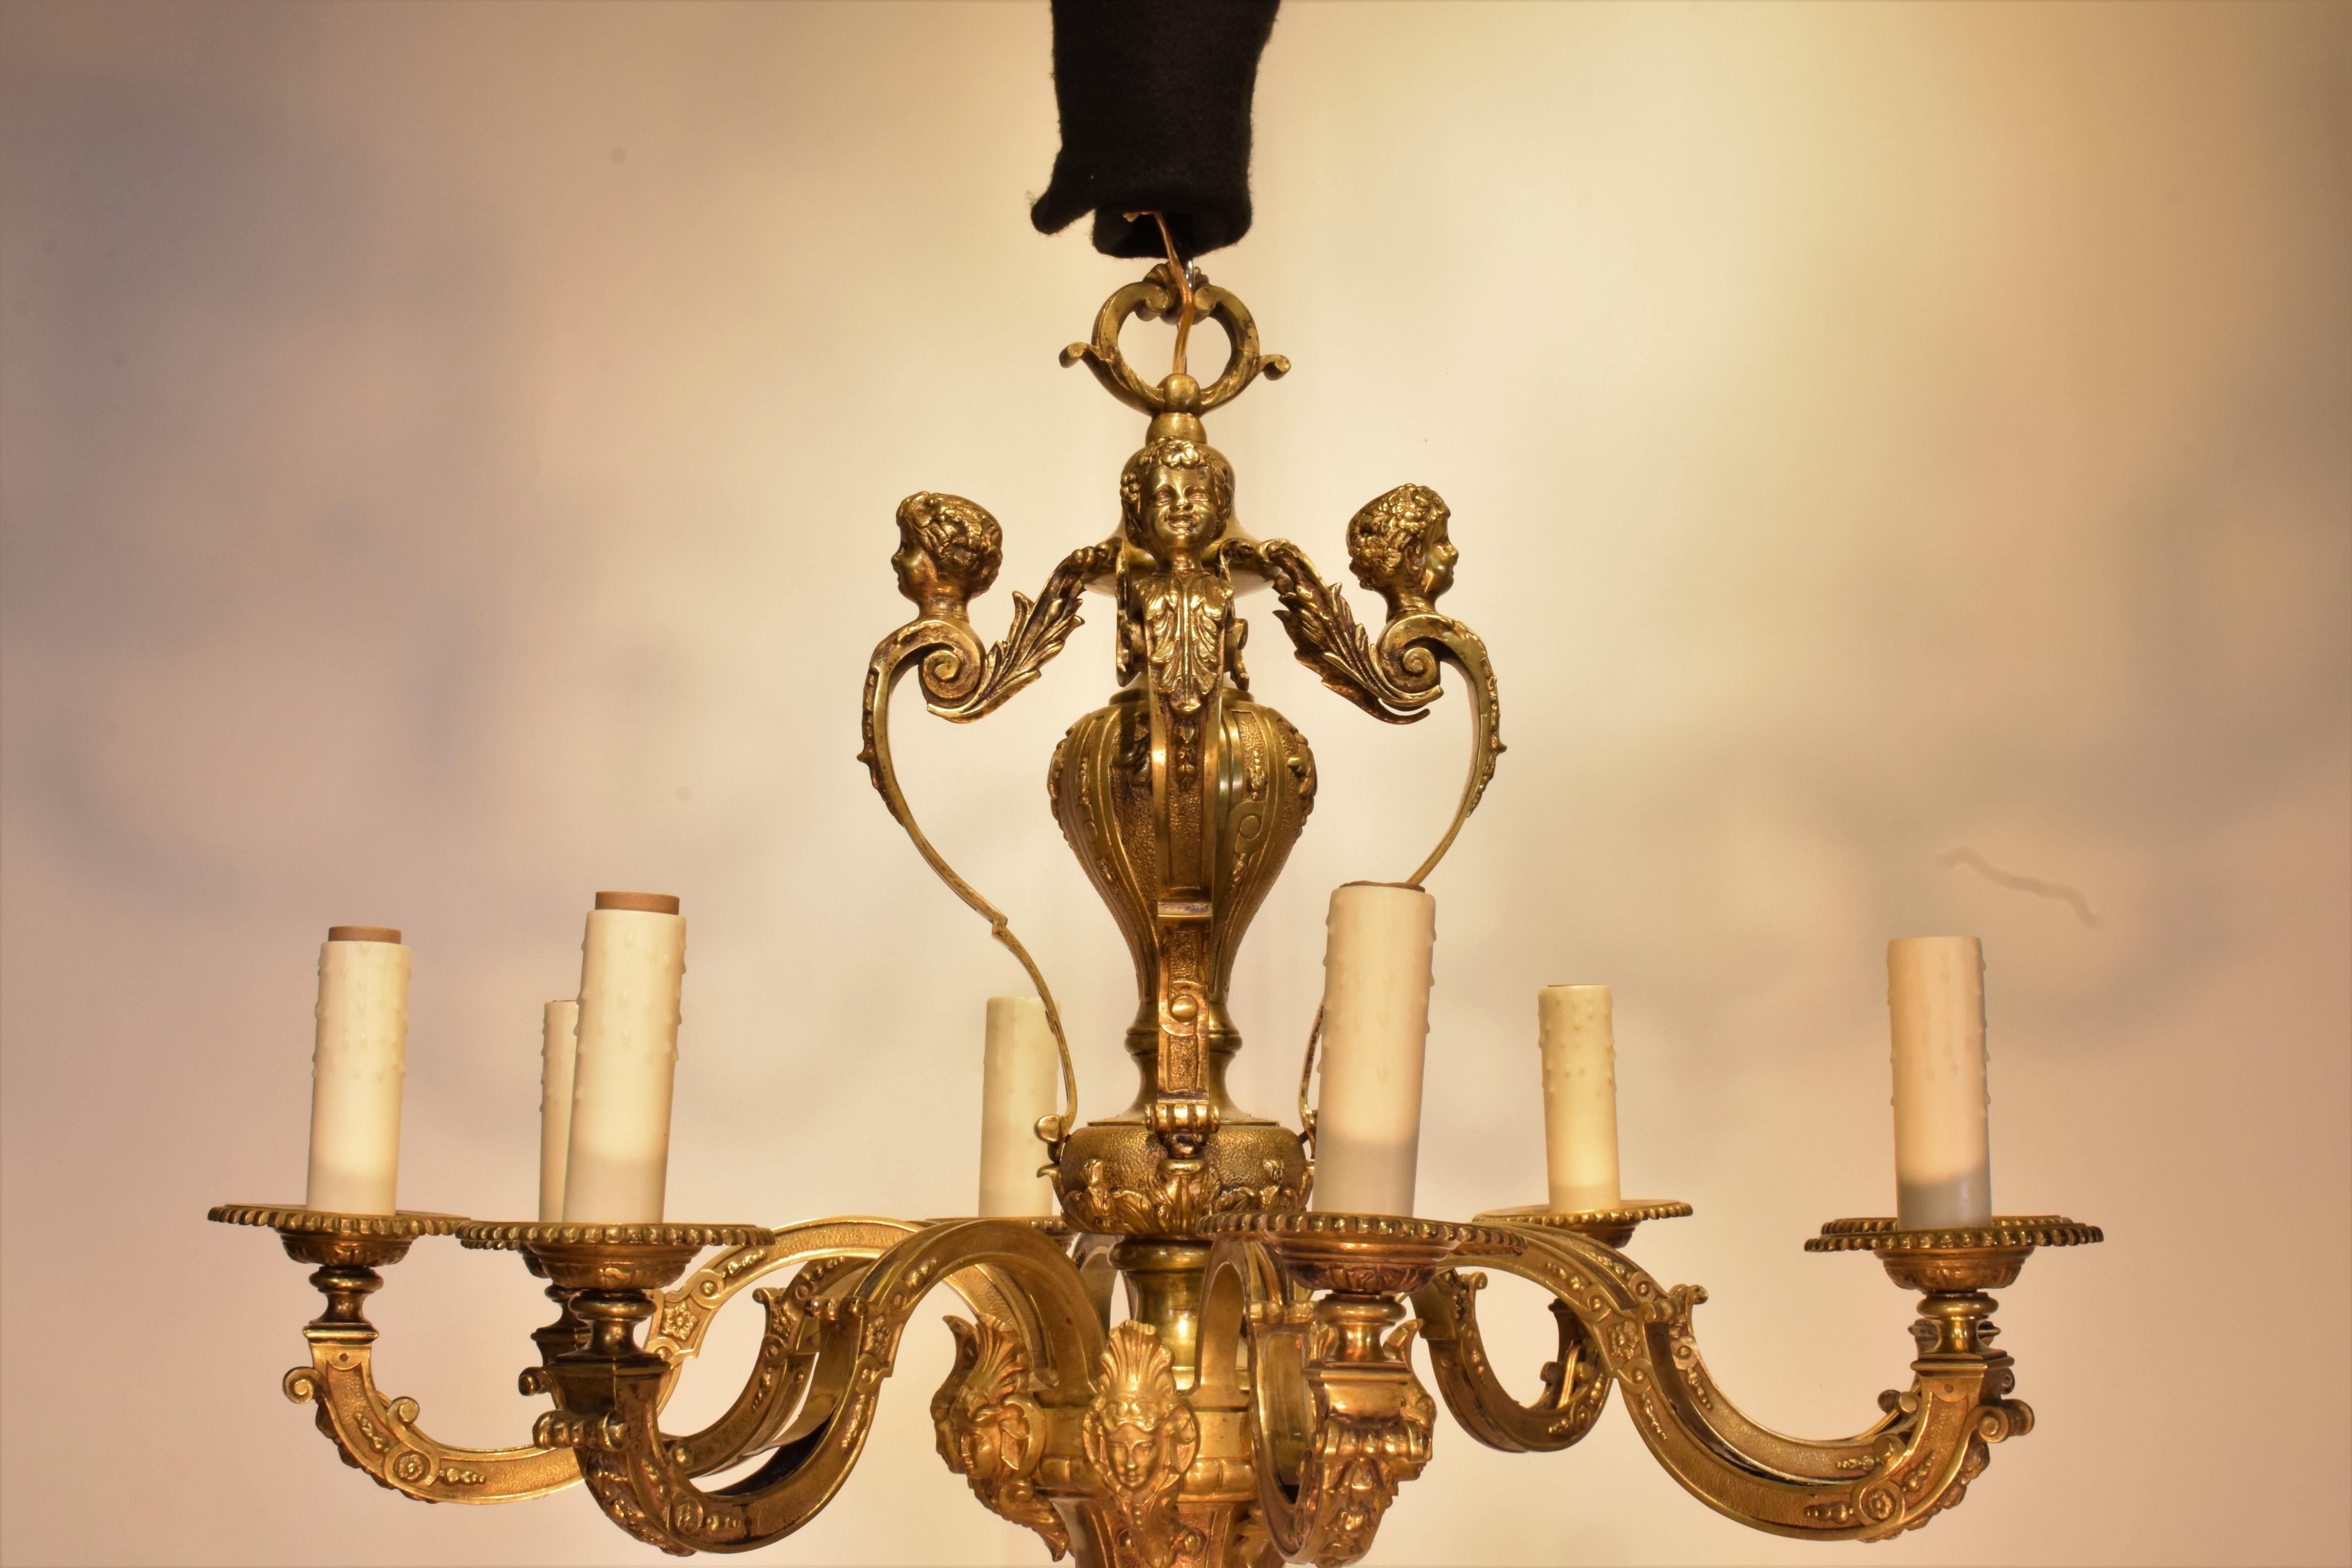 A Very Fine & Decorative Gilt Bronze Chandelier in the Regency taste. 
France, circa 1920. 8 lights
Dimensions: Height 28